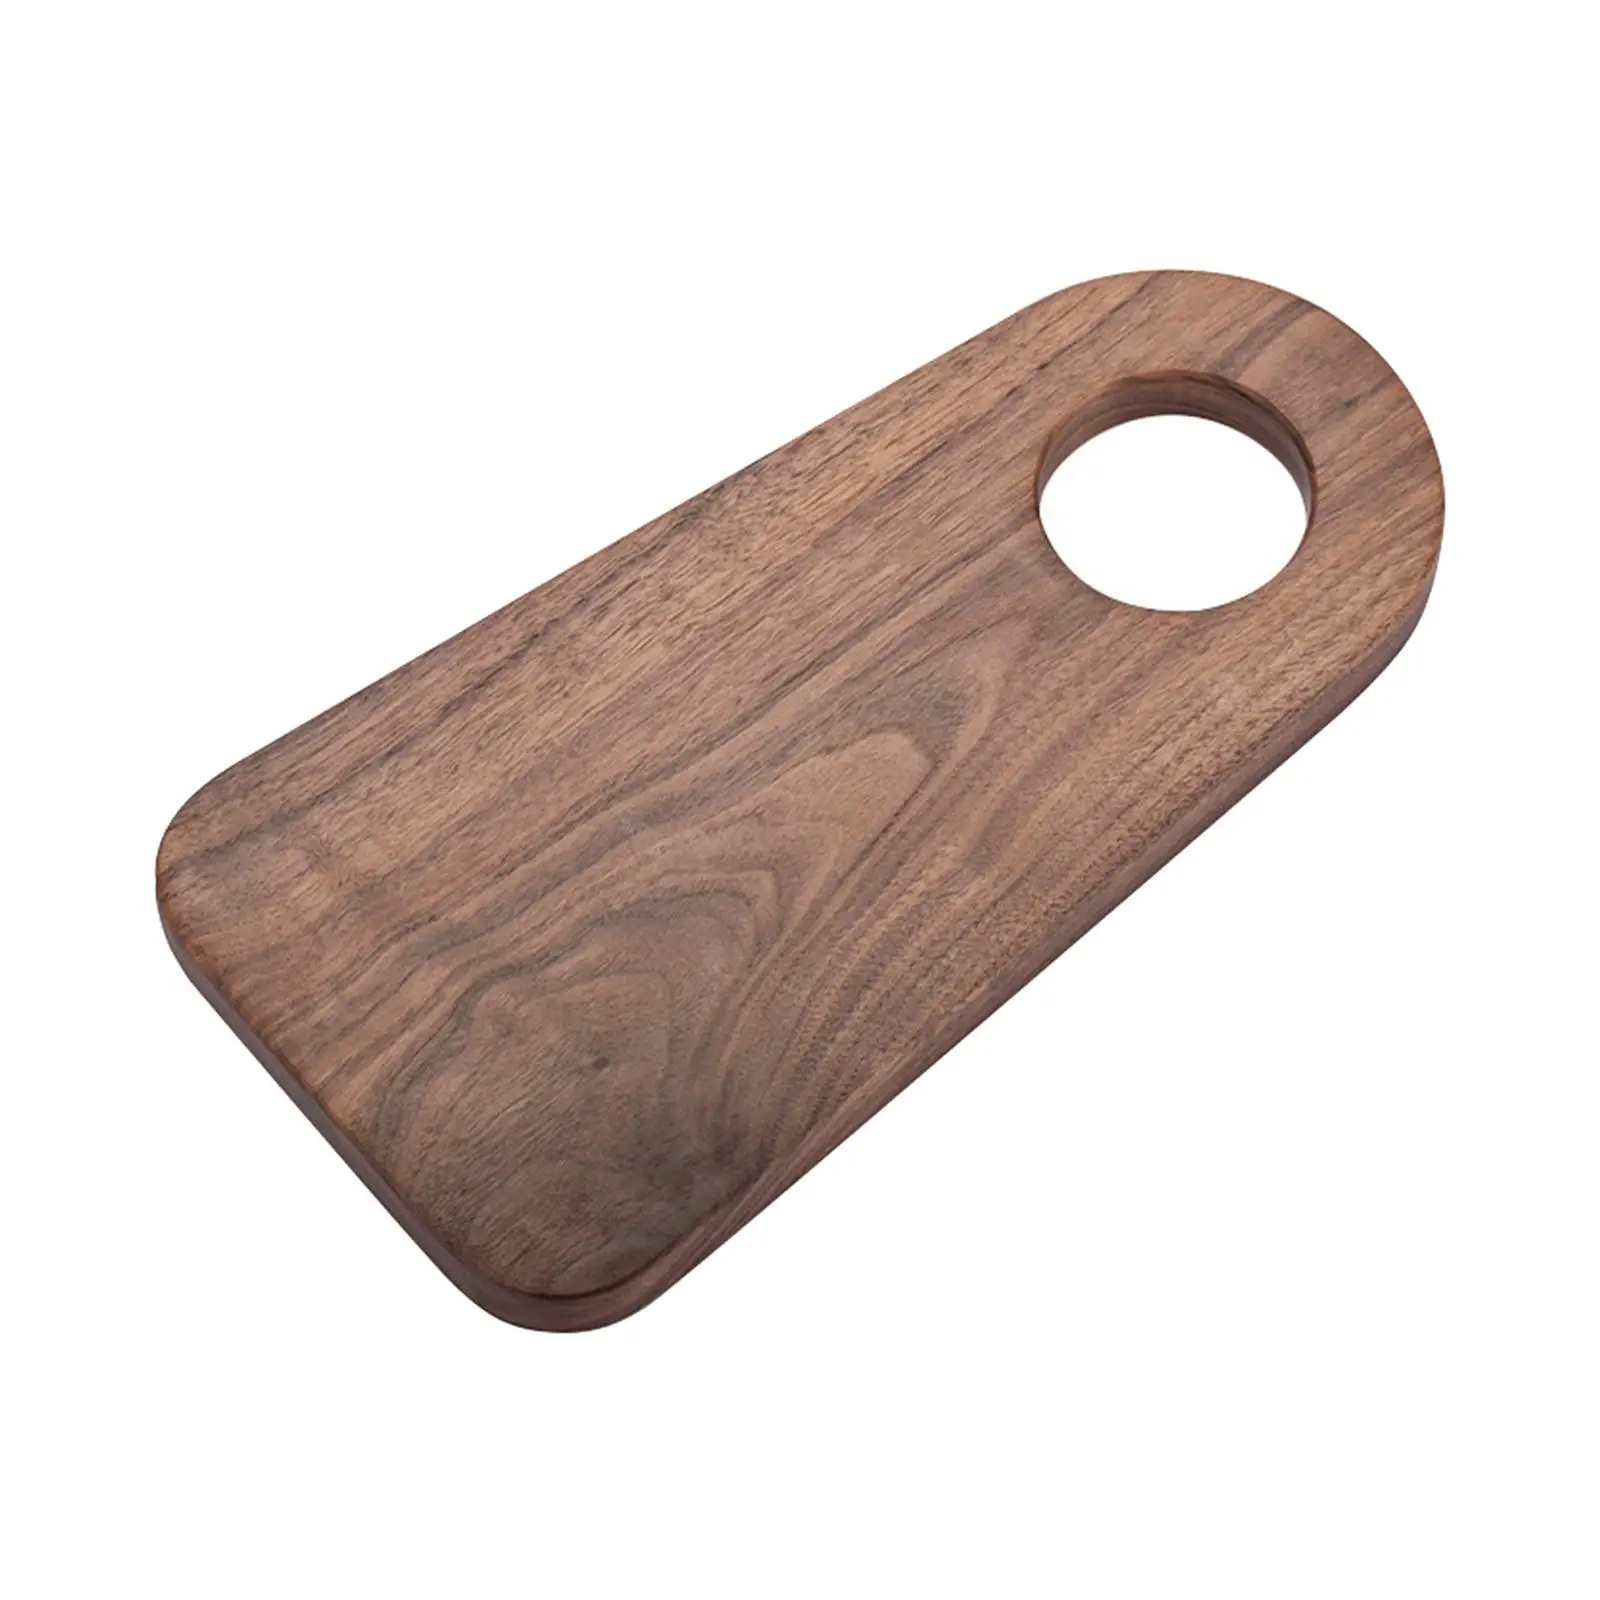 Wood Chopping Board Kitchen Tools Cheese Bread Tray Utensils Serving Board Cutting Board for Fruits Steak Vegetables Bread